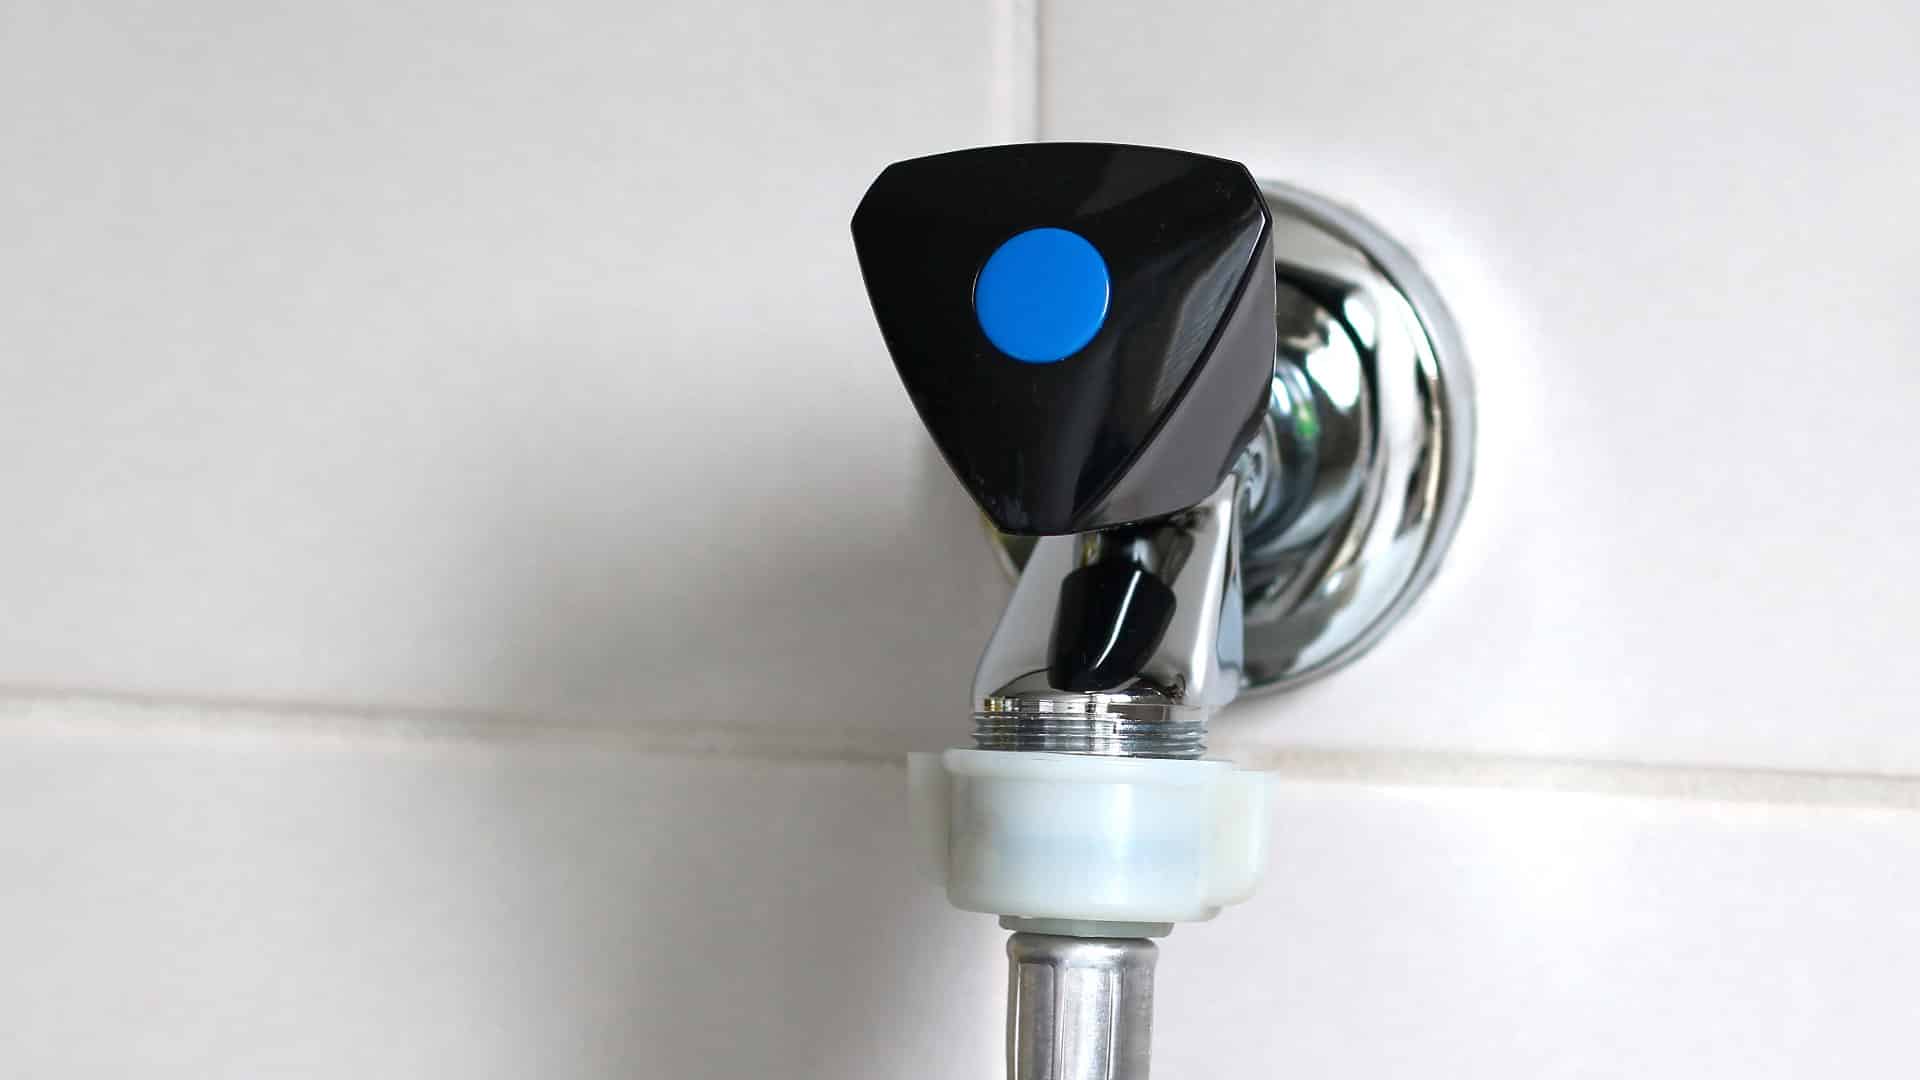 Featured image for “How To Replace a Washing Machine Faucet: 5 Simple Steps”